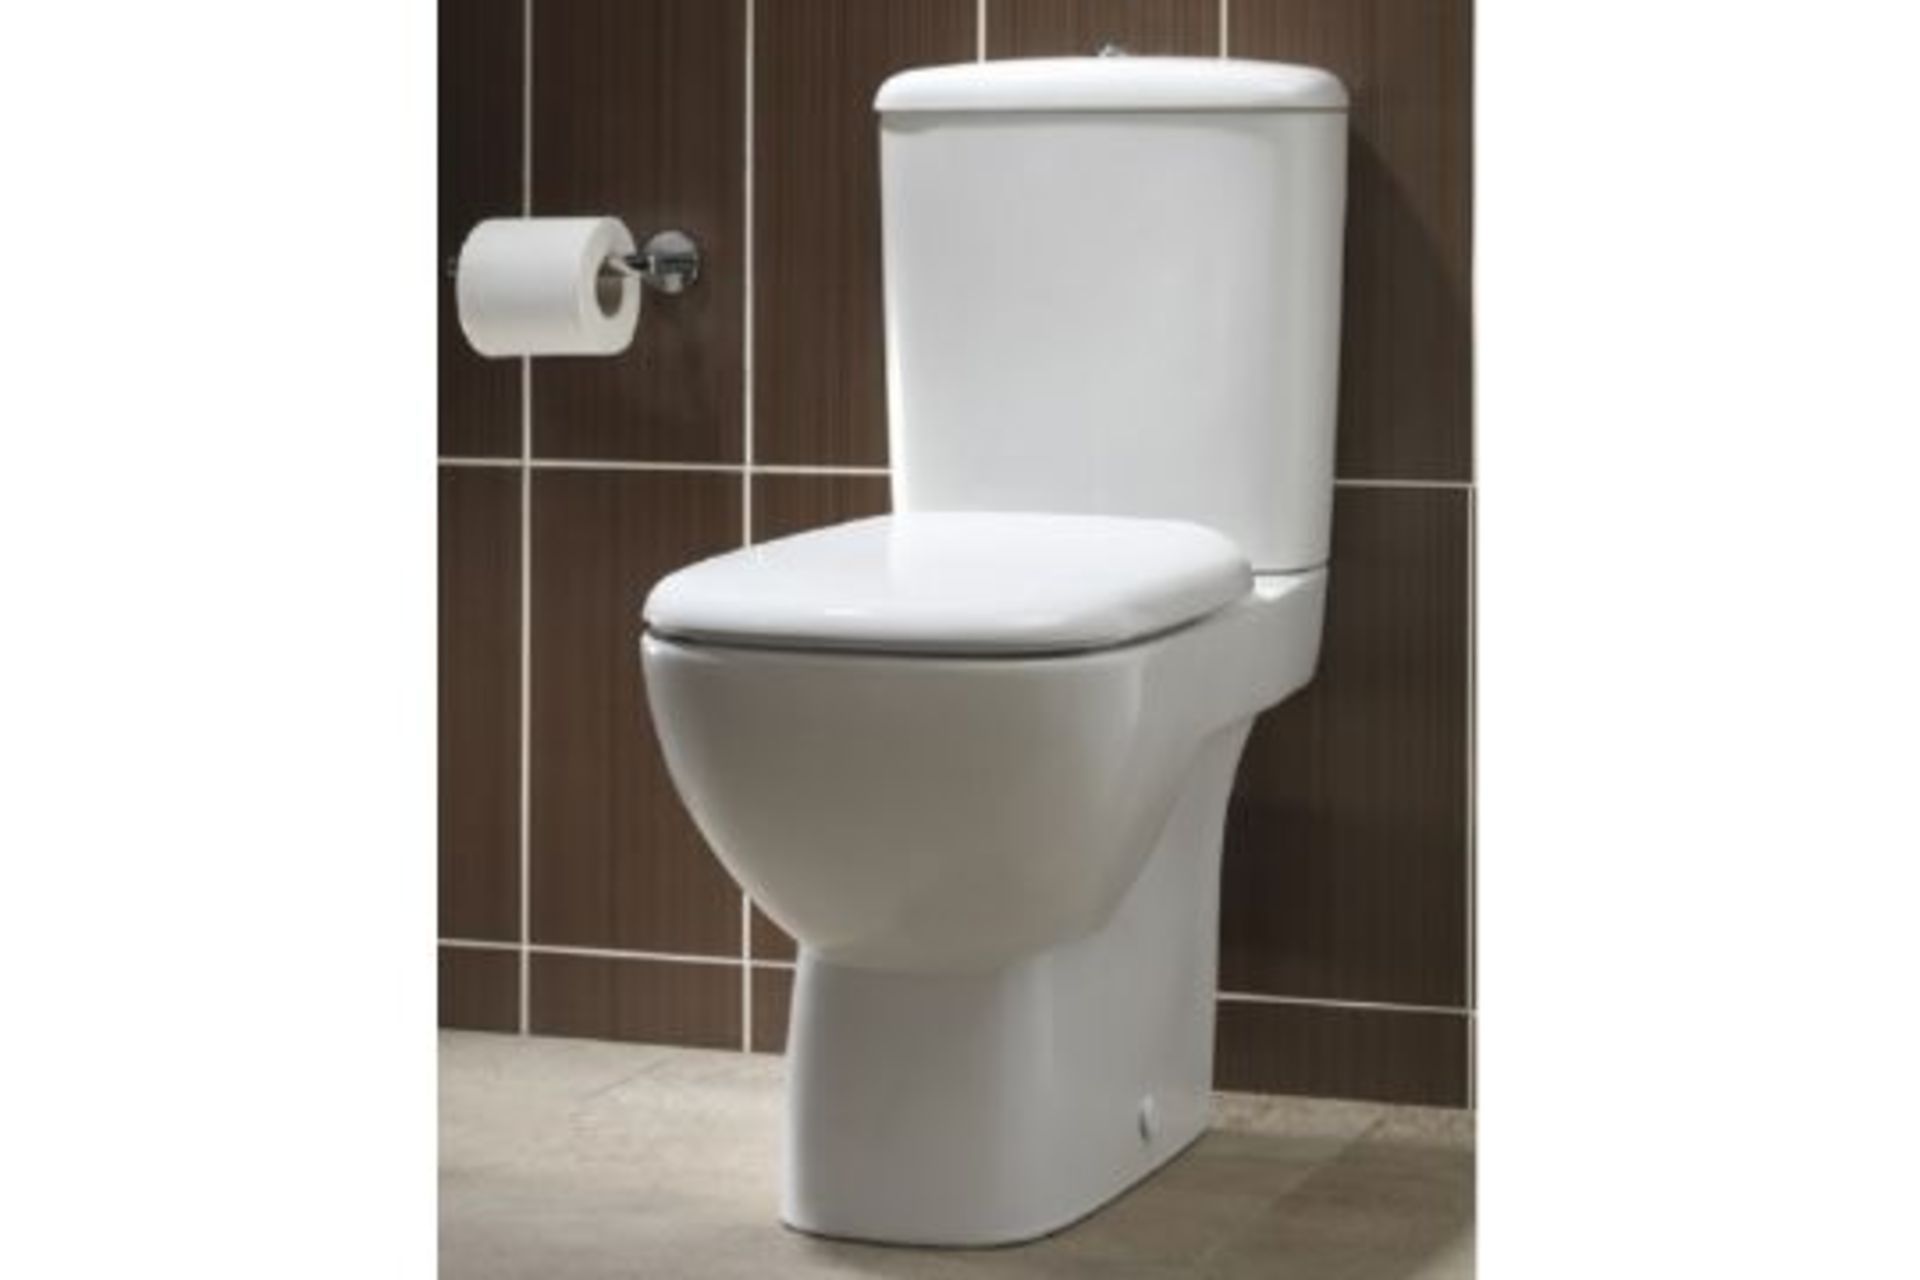 New Rak Metropolitan Back To Wall WC Pan. 337 x 415 mm (W x H). Seat Not Included. - Image 2 of 2